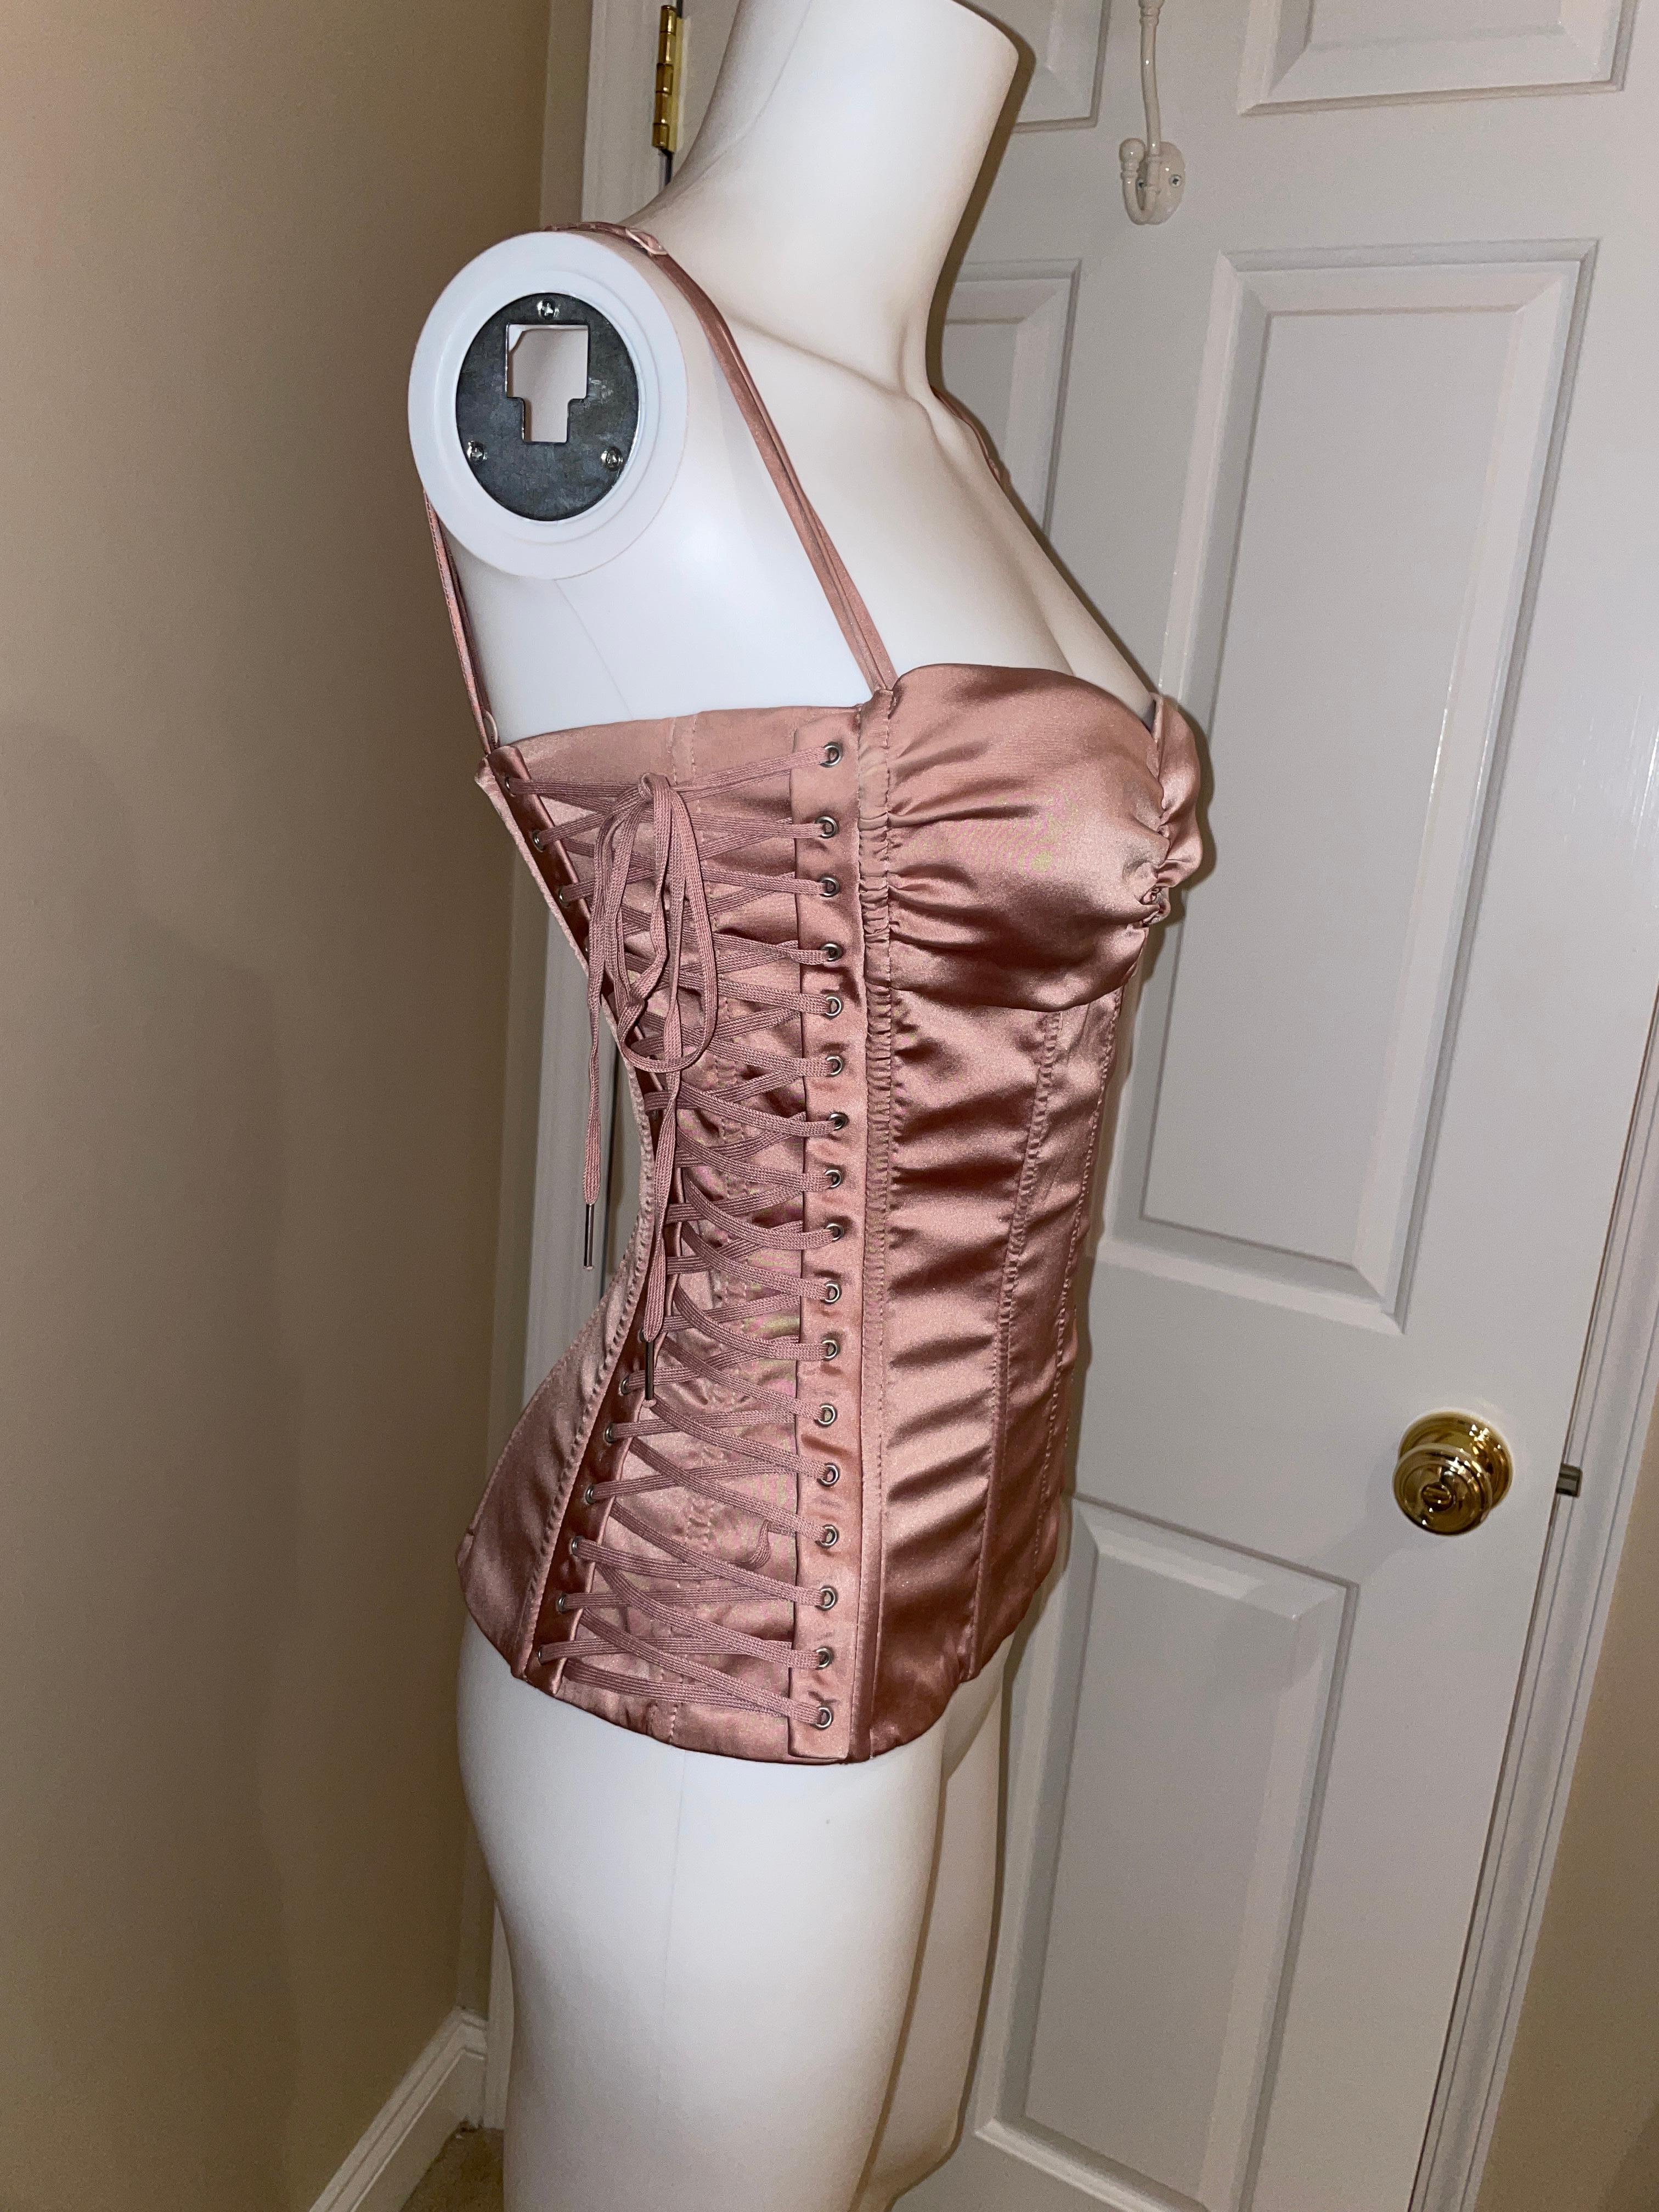 DOLCE & GABBANA 2003 sex collection boned lace up pink corset top vintage. 
Vintage Dolce and Gabbana pink silk lace up bustier top from the iconic 2003 runway sex collection. Excellent condition, no flaws noted. Harding boning to suck you in and